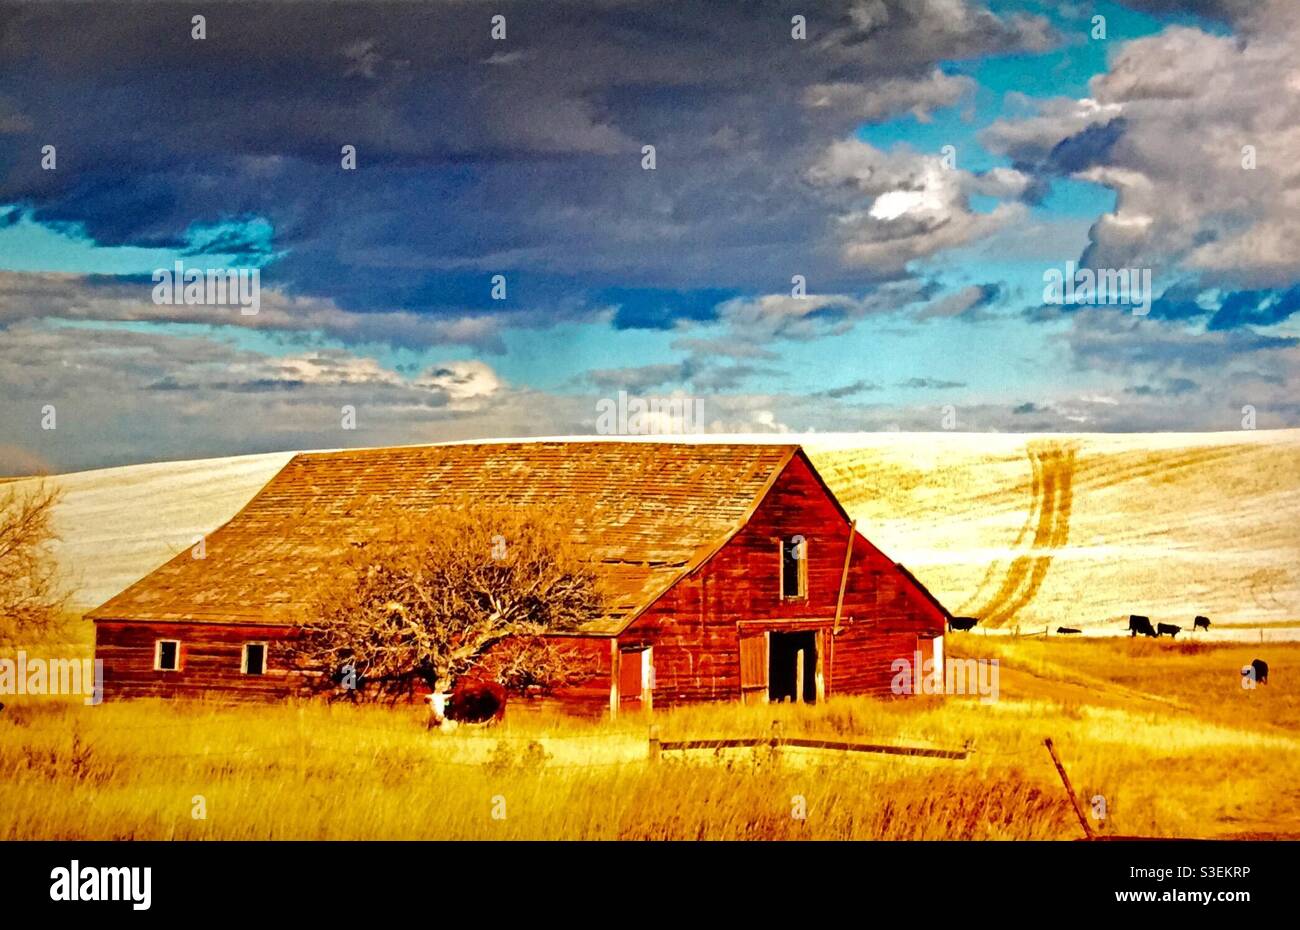 The old barn, landscape, amazing sky, tracks in the field, cattle foraging, grazing, farm, agriculture, Alberta, Canada Stock Photo